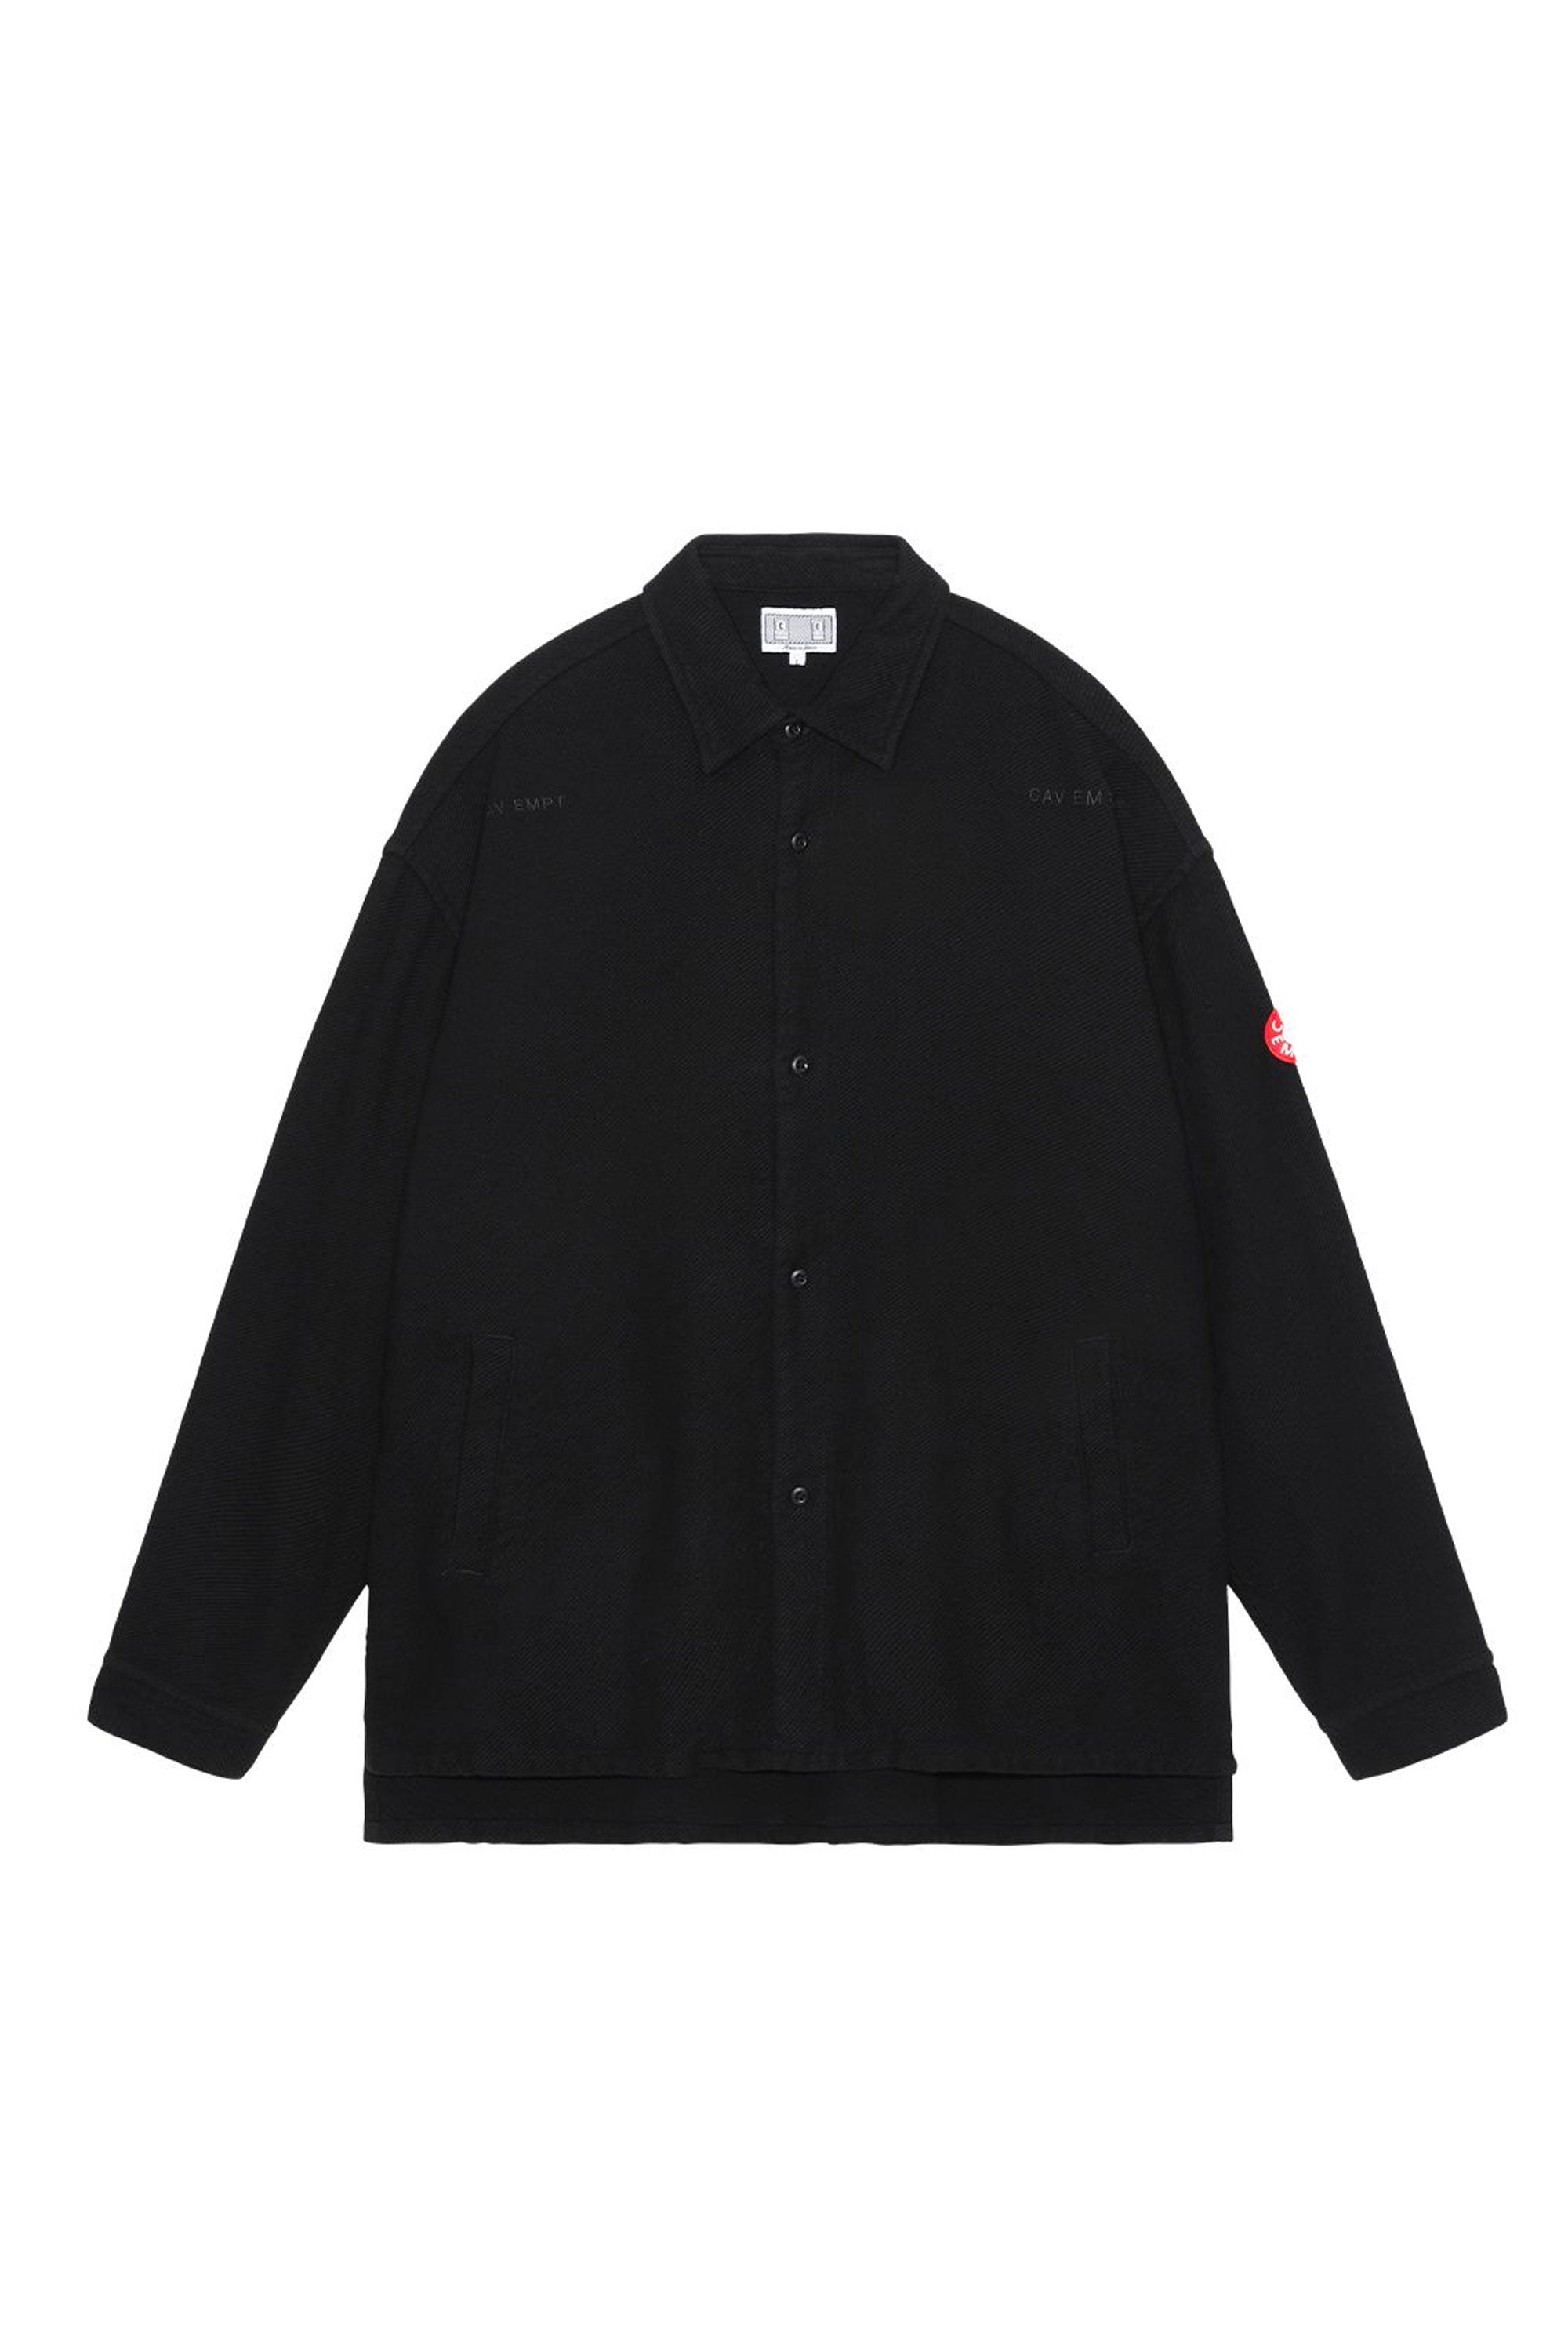 The CAV EMPT - WELT POCKETS BIG SHIRT BLACK available online with global shipping, and in PAM Stores Melbourne and Sydney.